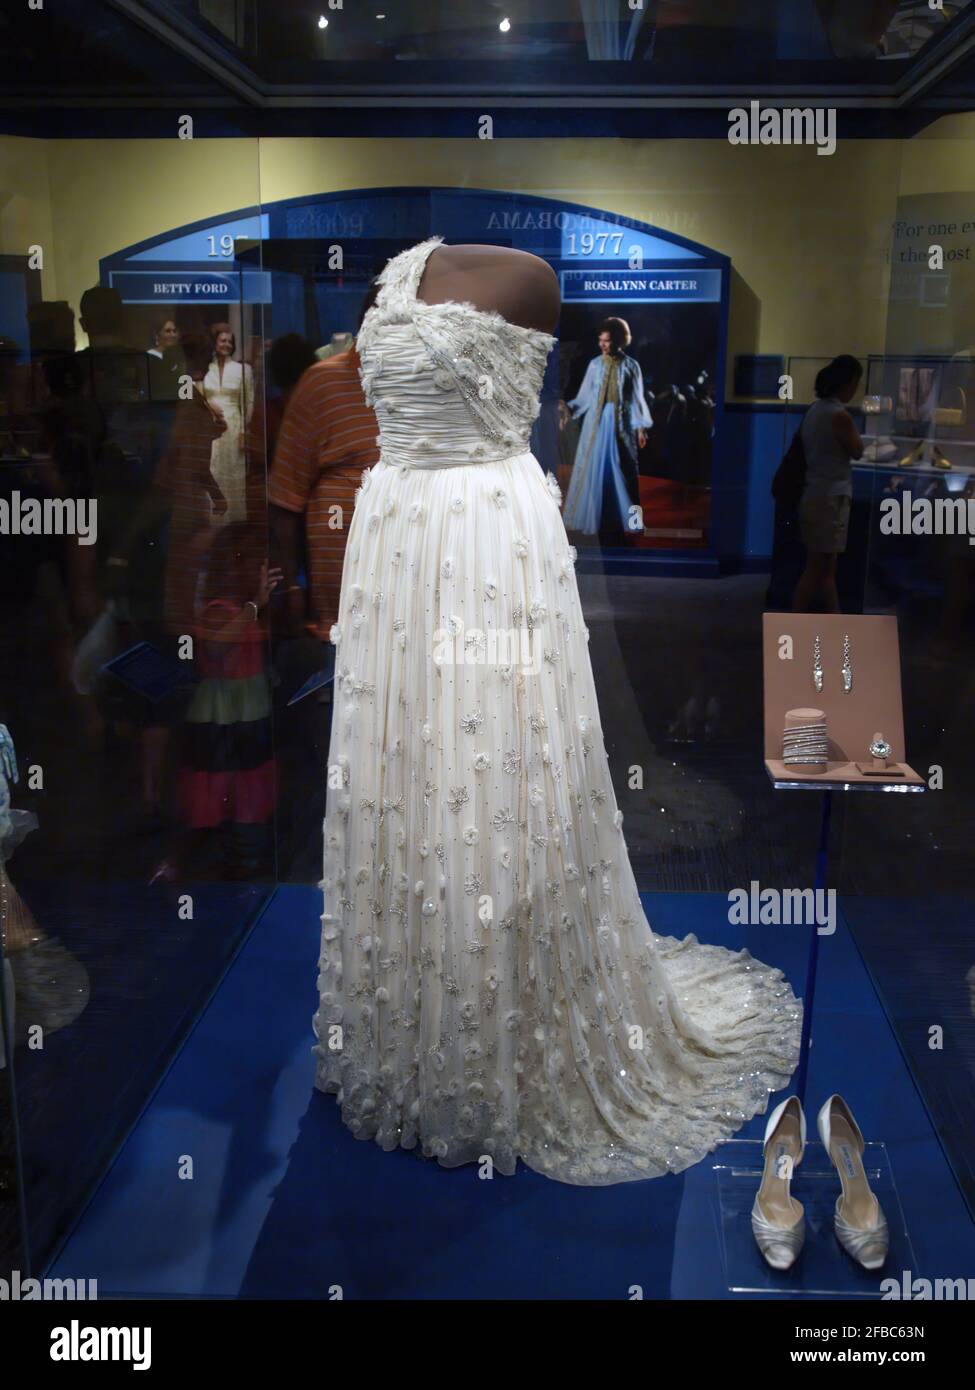 The white silk chiffon gown, shoes, and jewelry Michelle Obama wore for the 2009 inaugural balls are displayed in the Smithsonian. Stock Photo